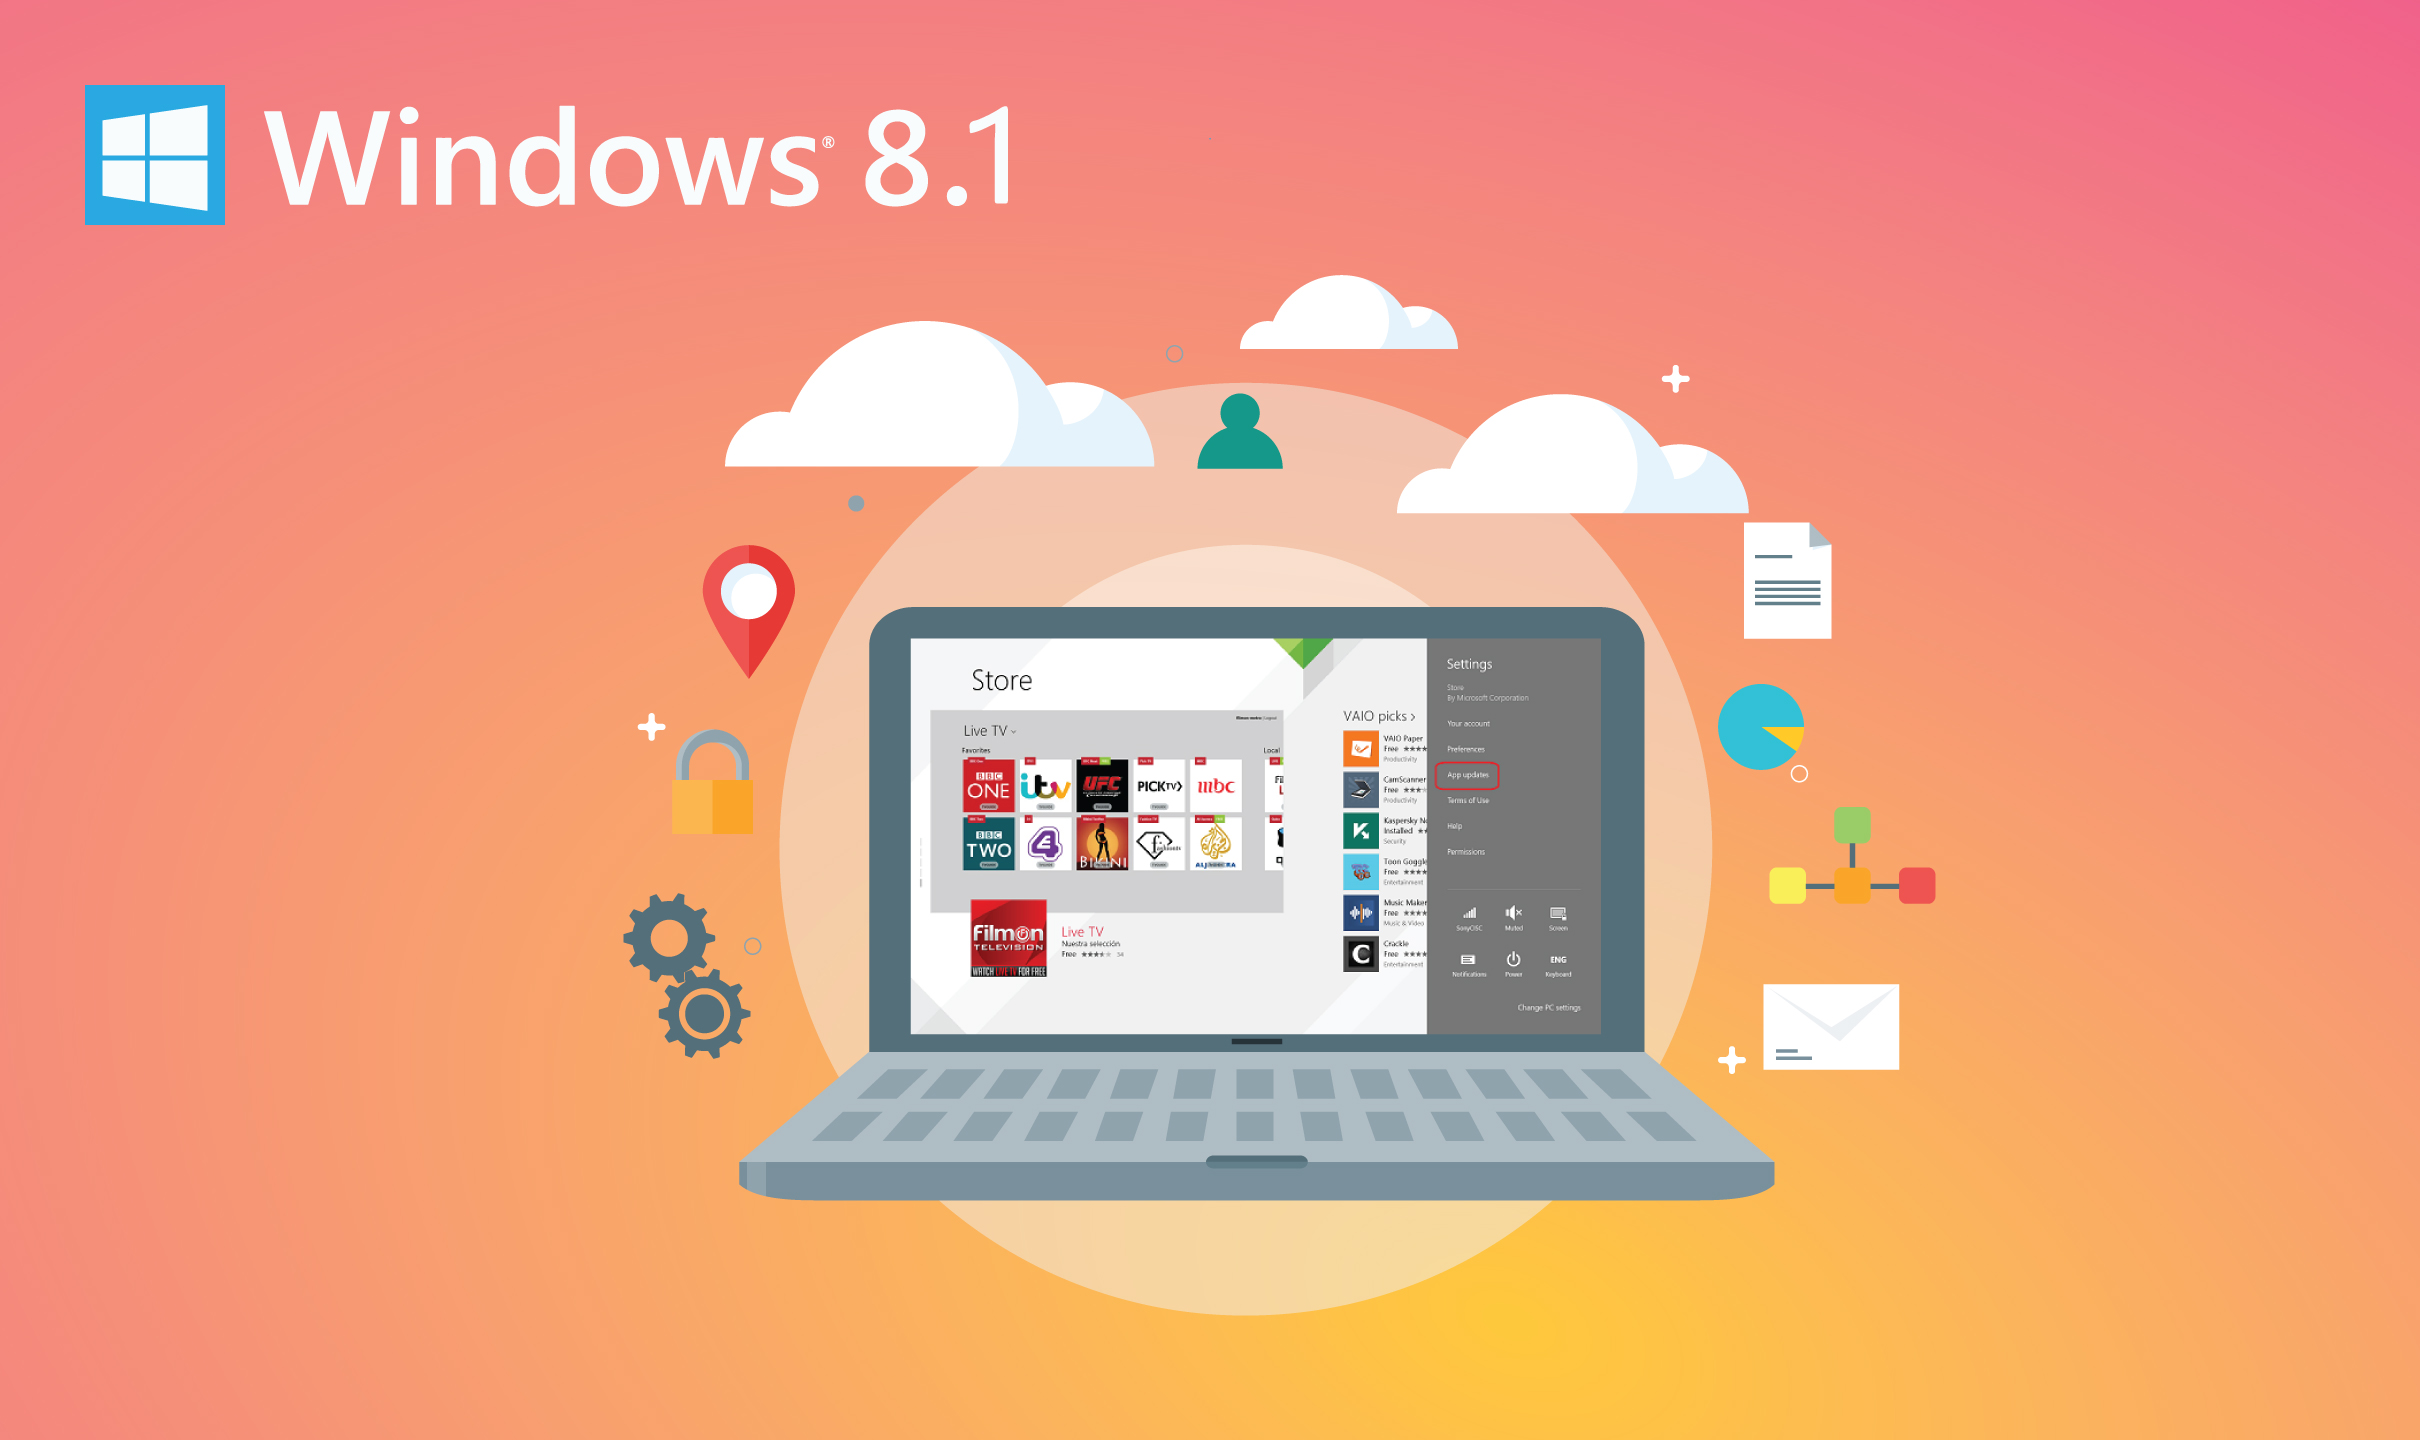 Purchase Windows 8.1 Home
